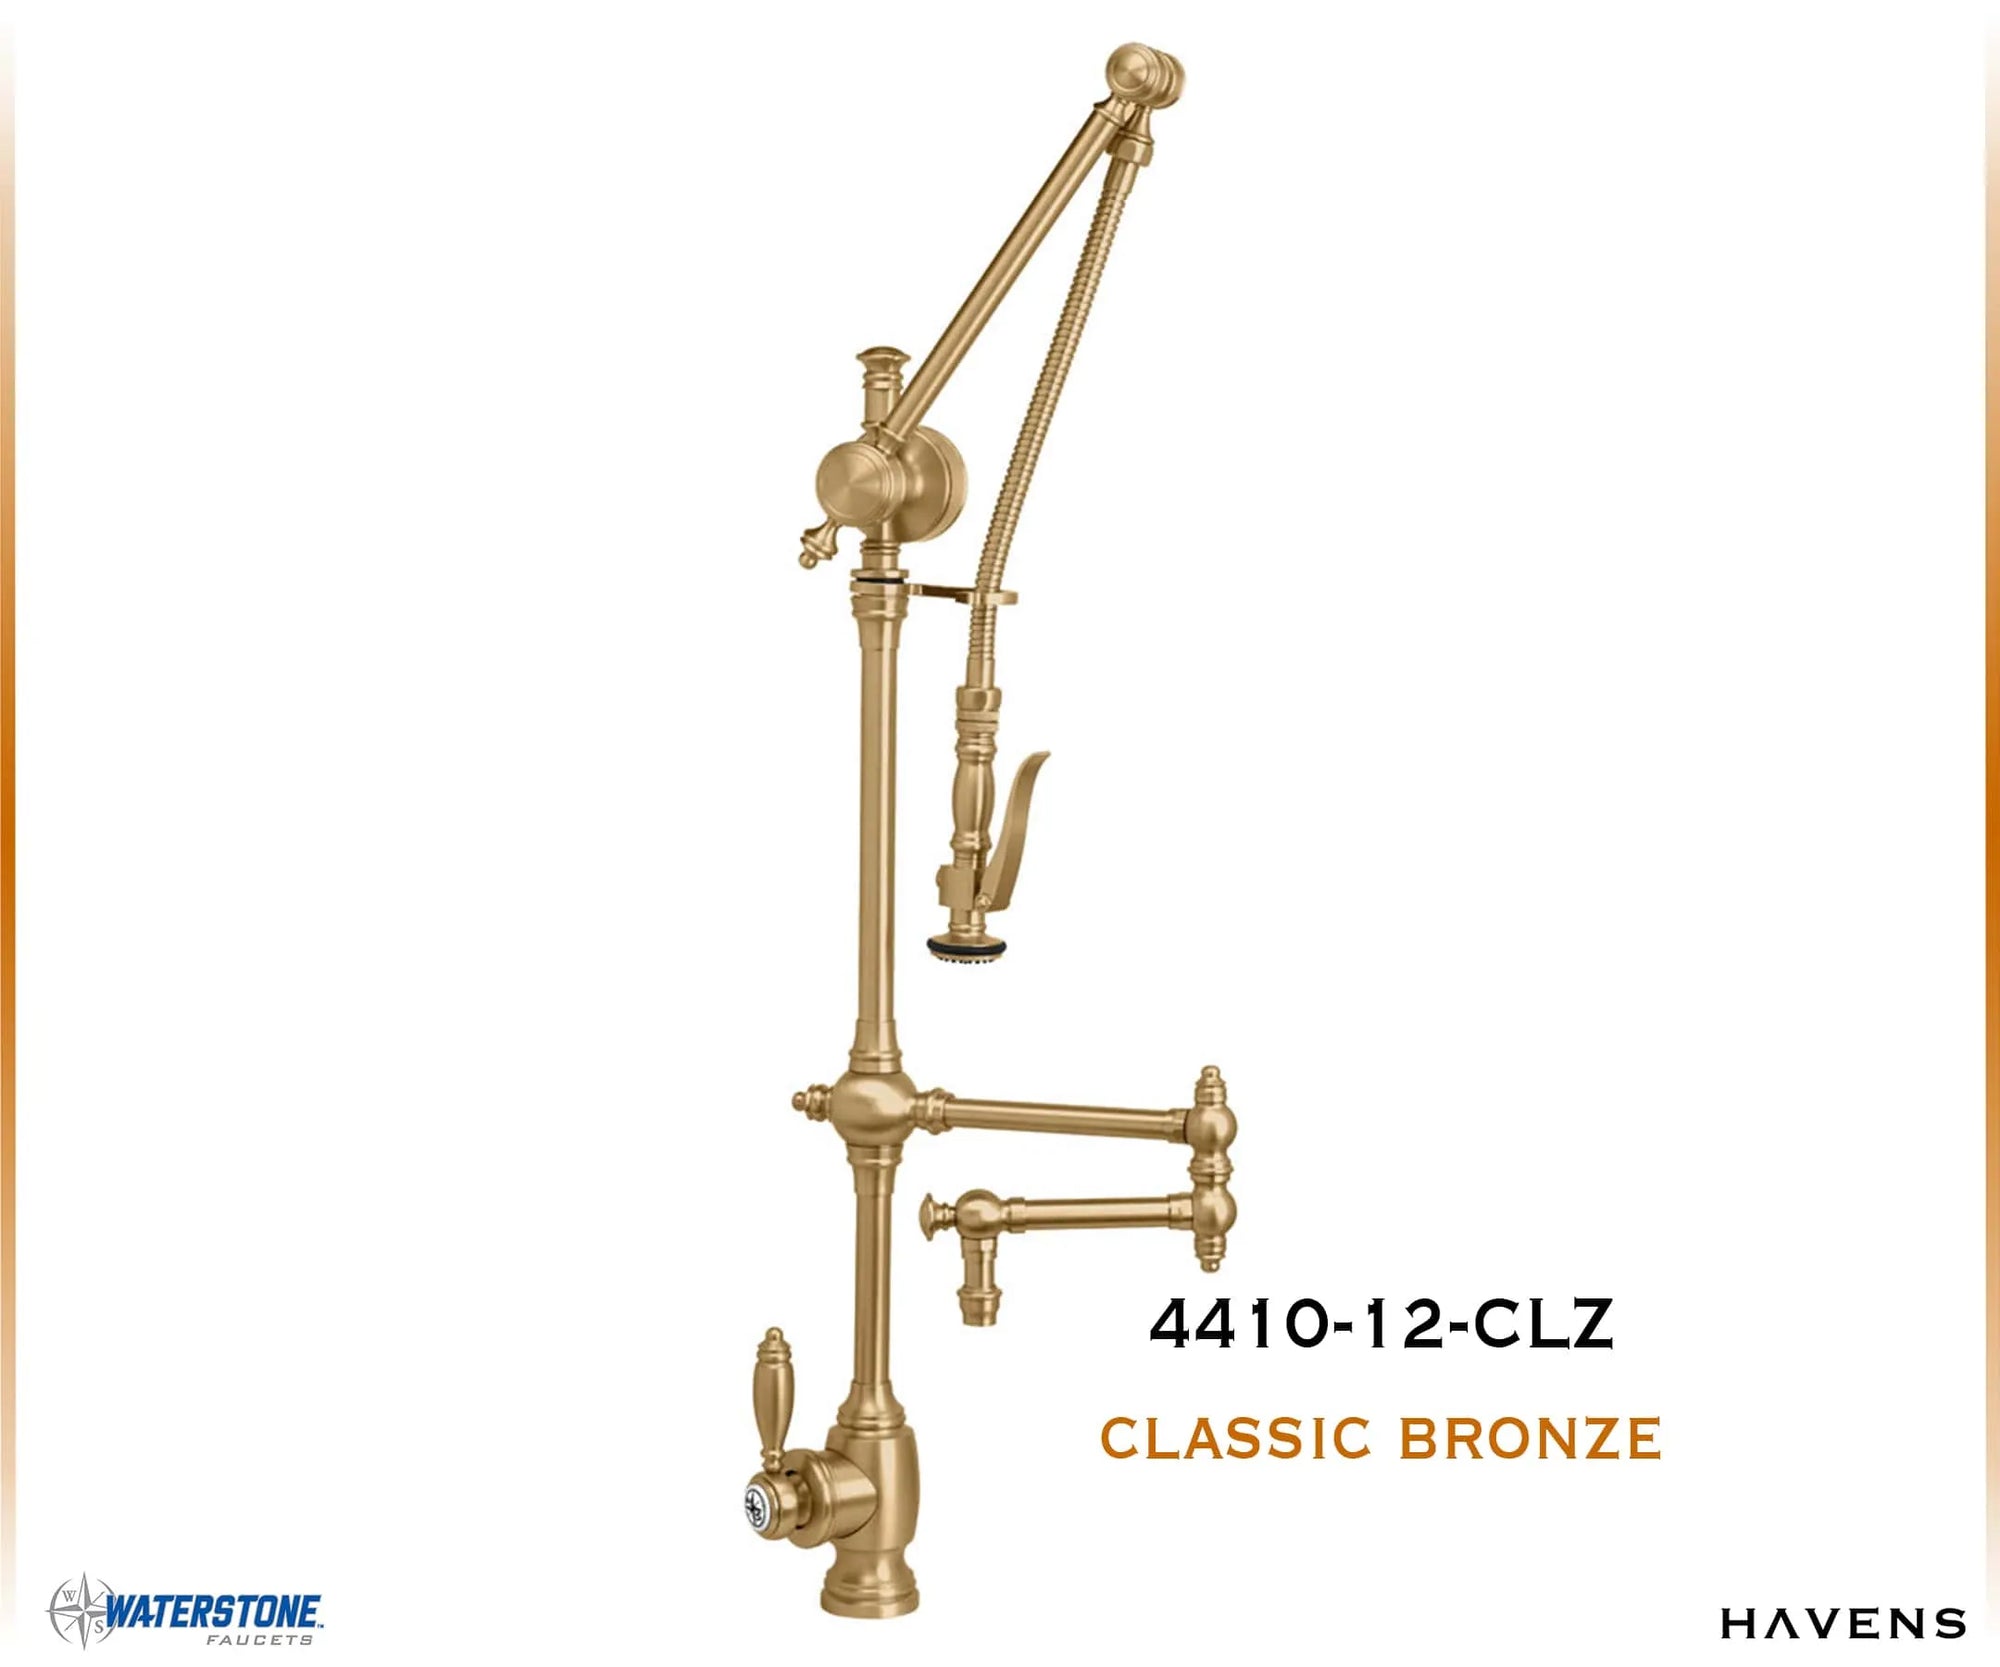 Waterstone Traditional Gantry Faucet – Articulated Spout 4410-12